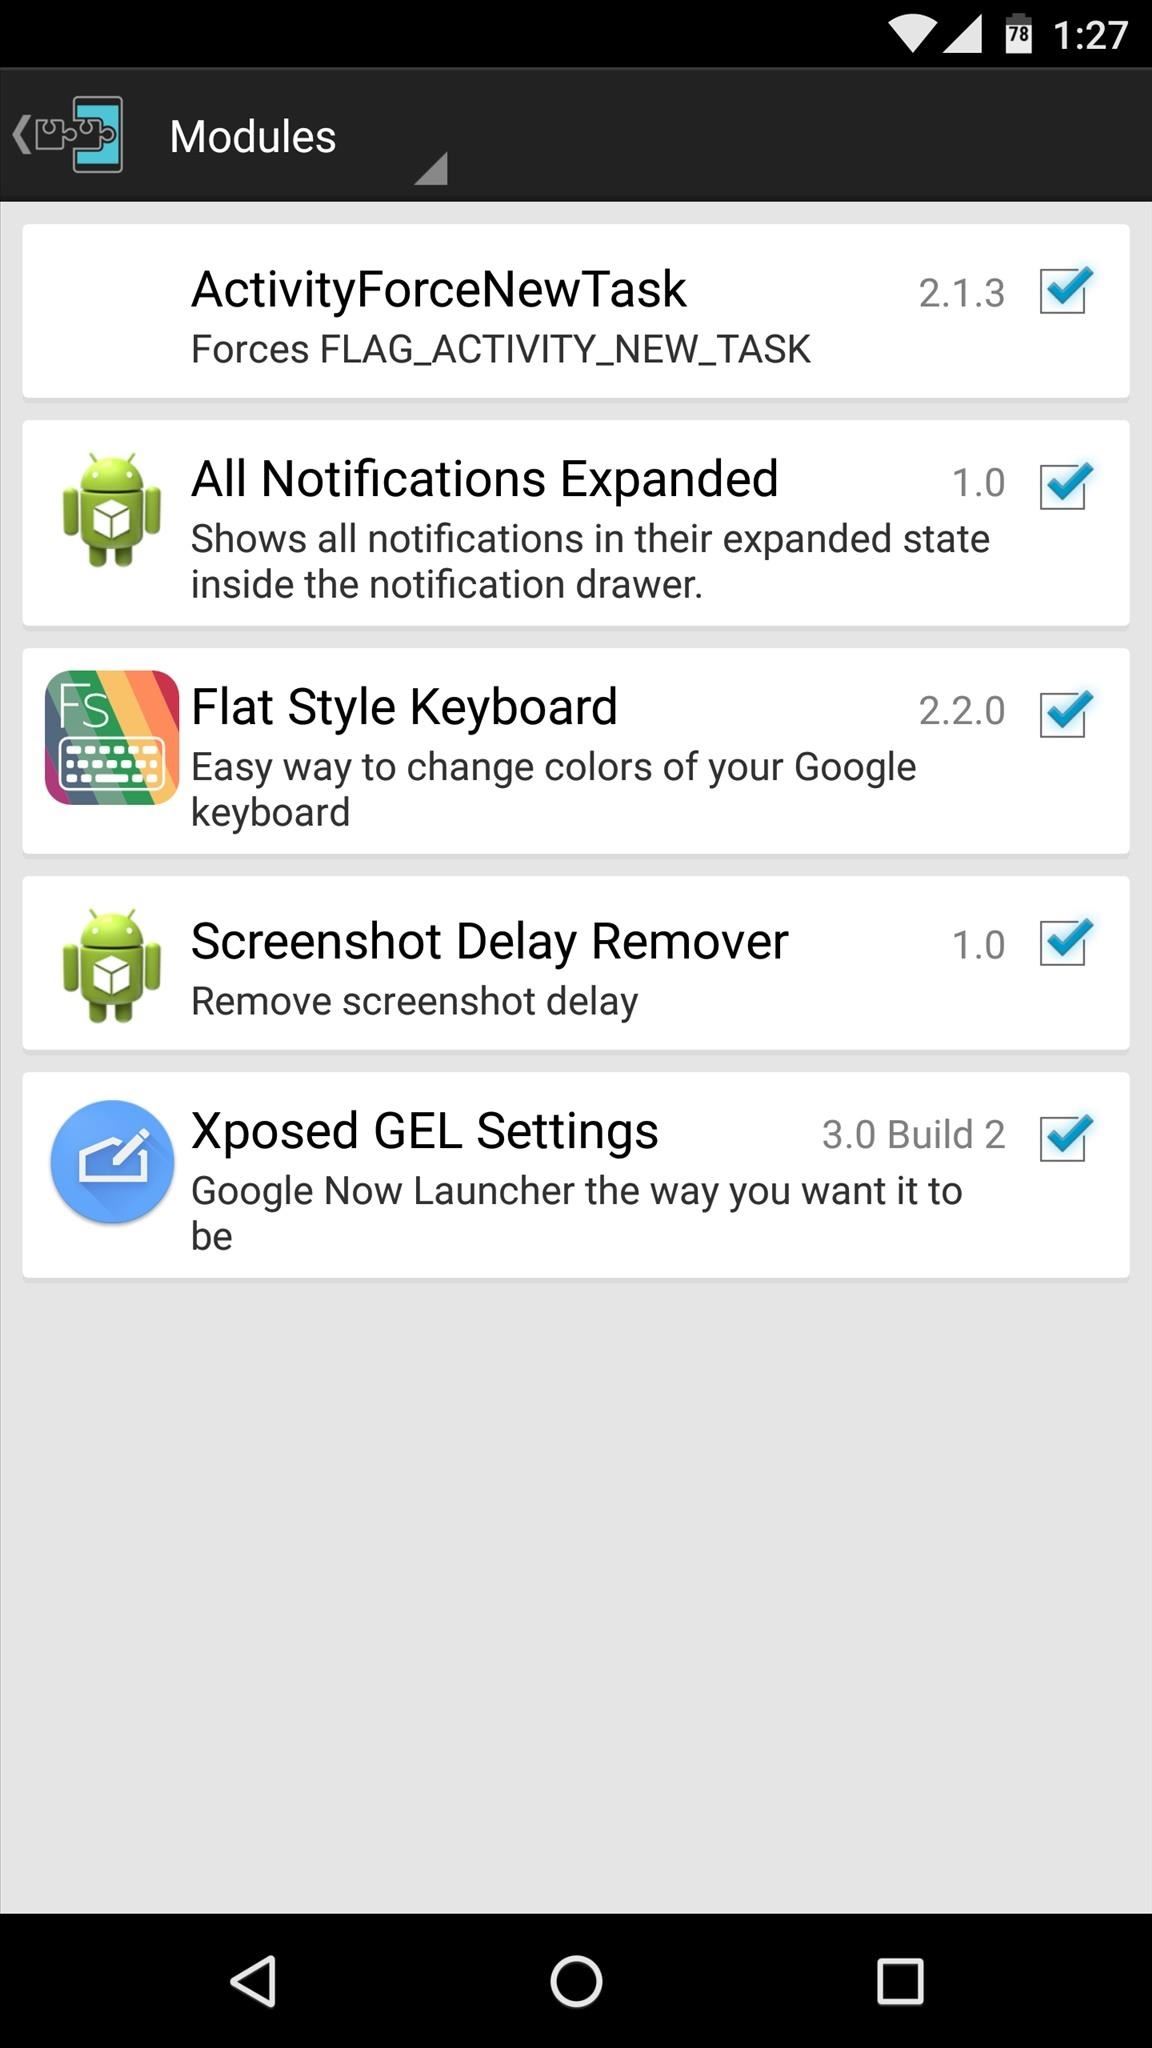 How to Install the Xposed Framework on Android 6.0 Marshmallow Devices